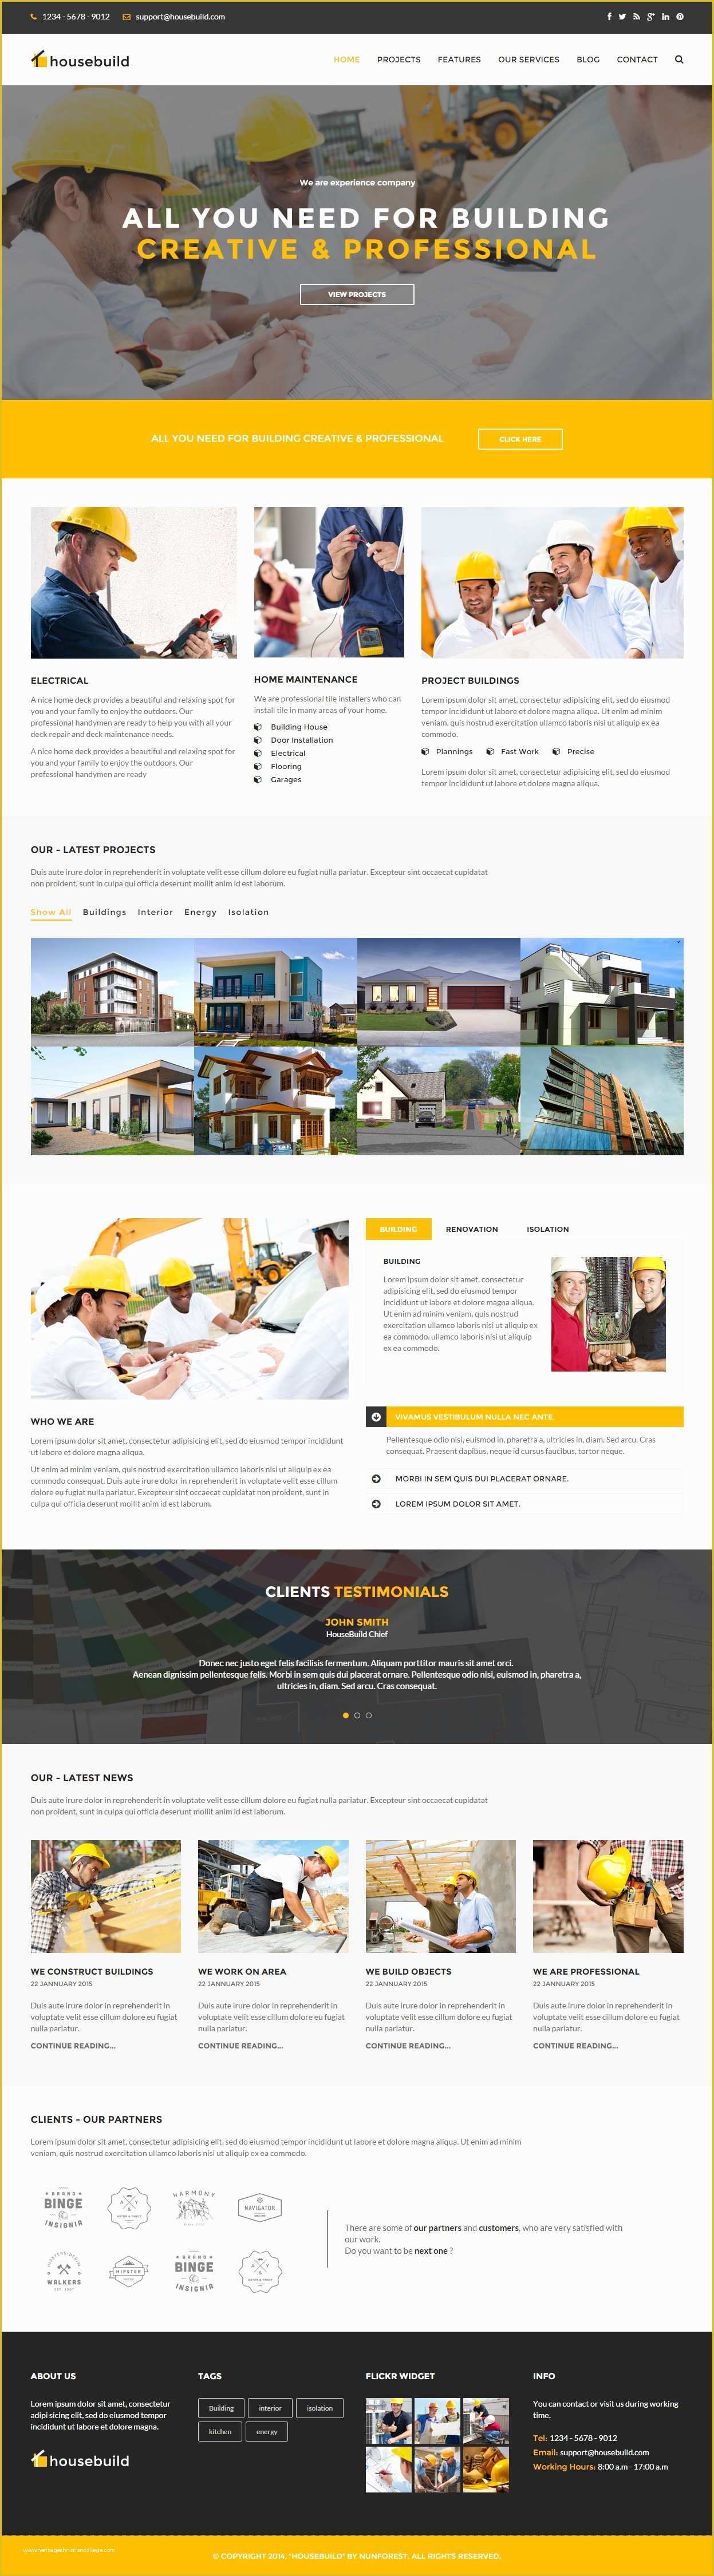 Free Professional Business Website Templates Of 20 Professional Business Website Templates Free Download